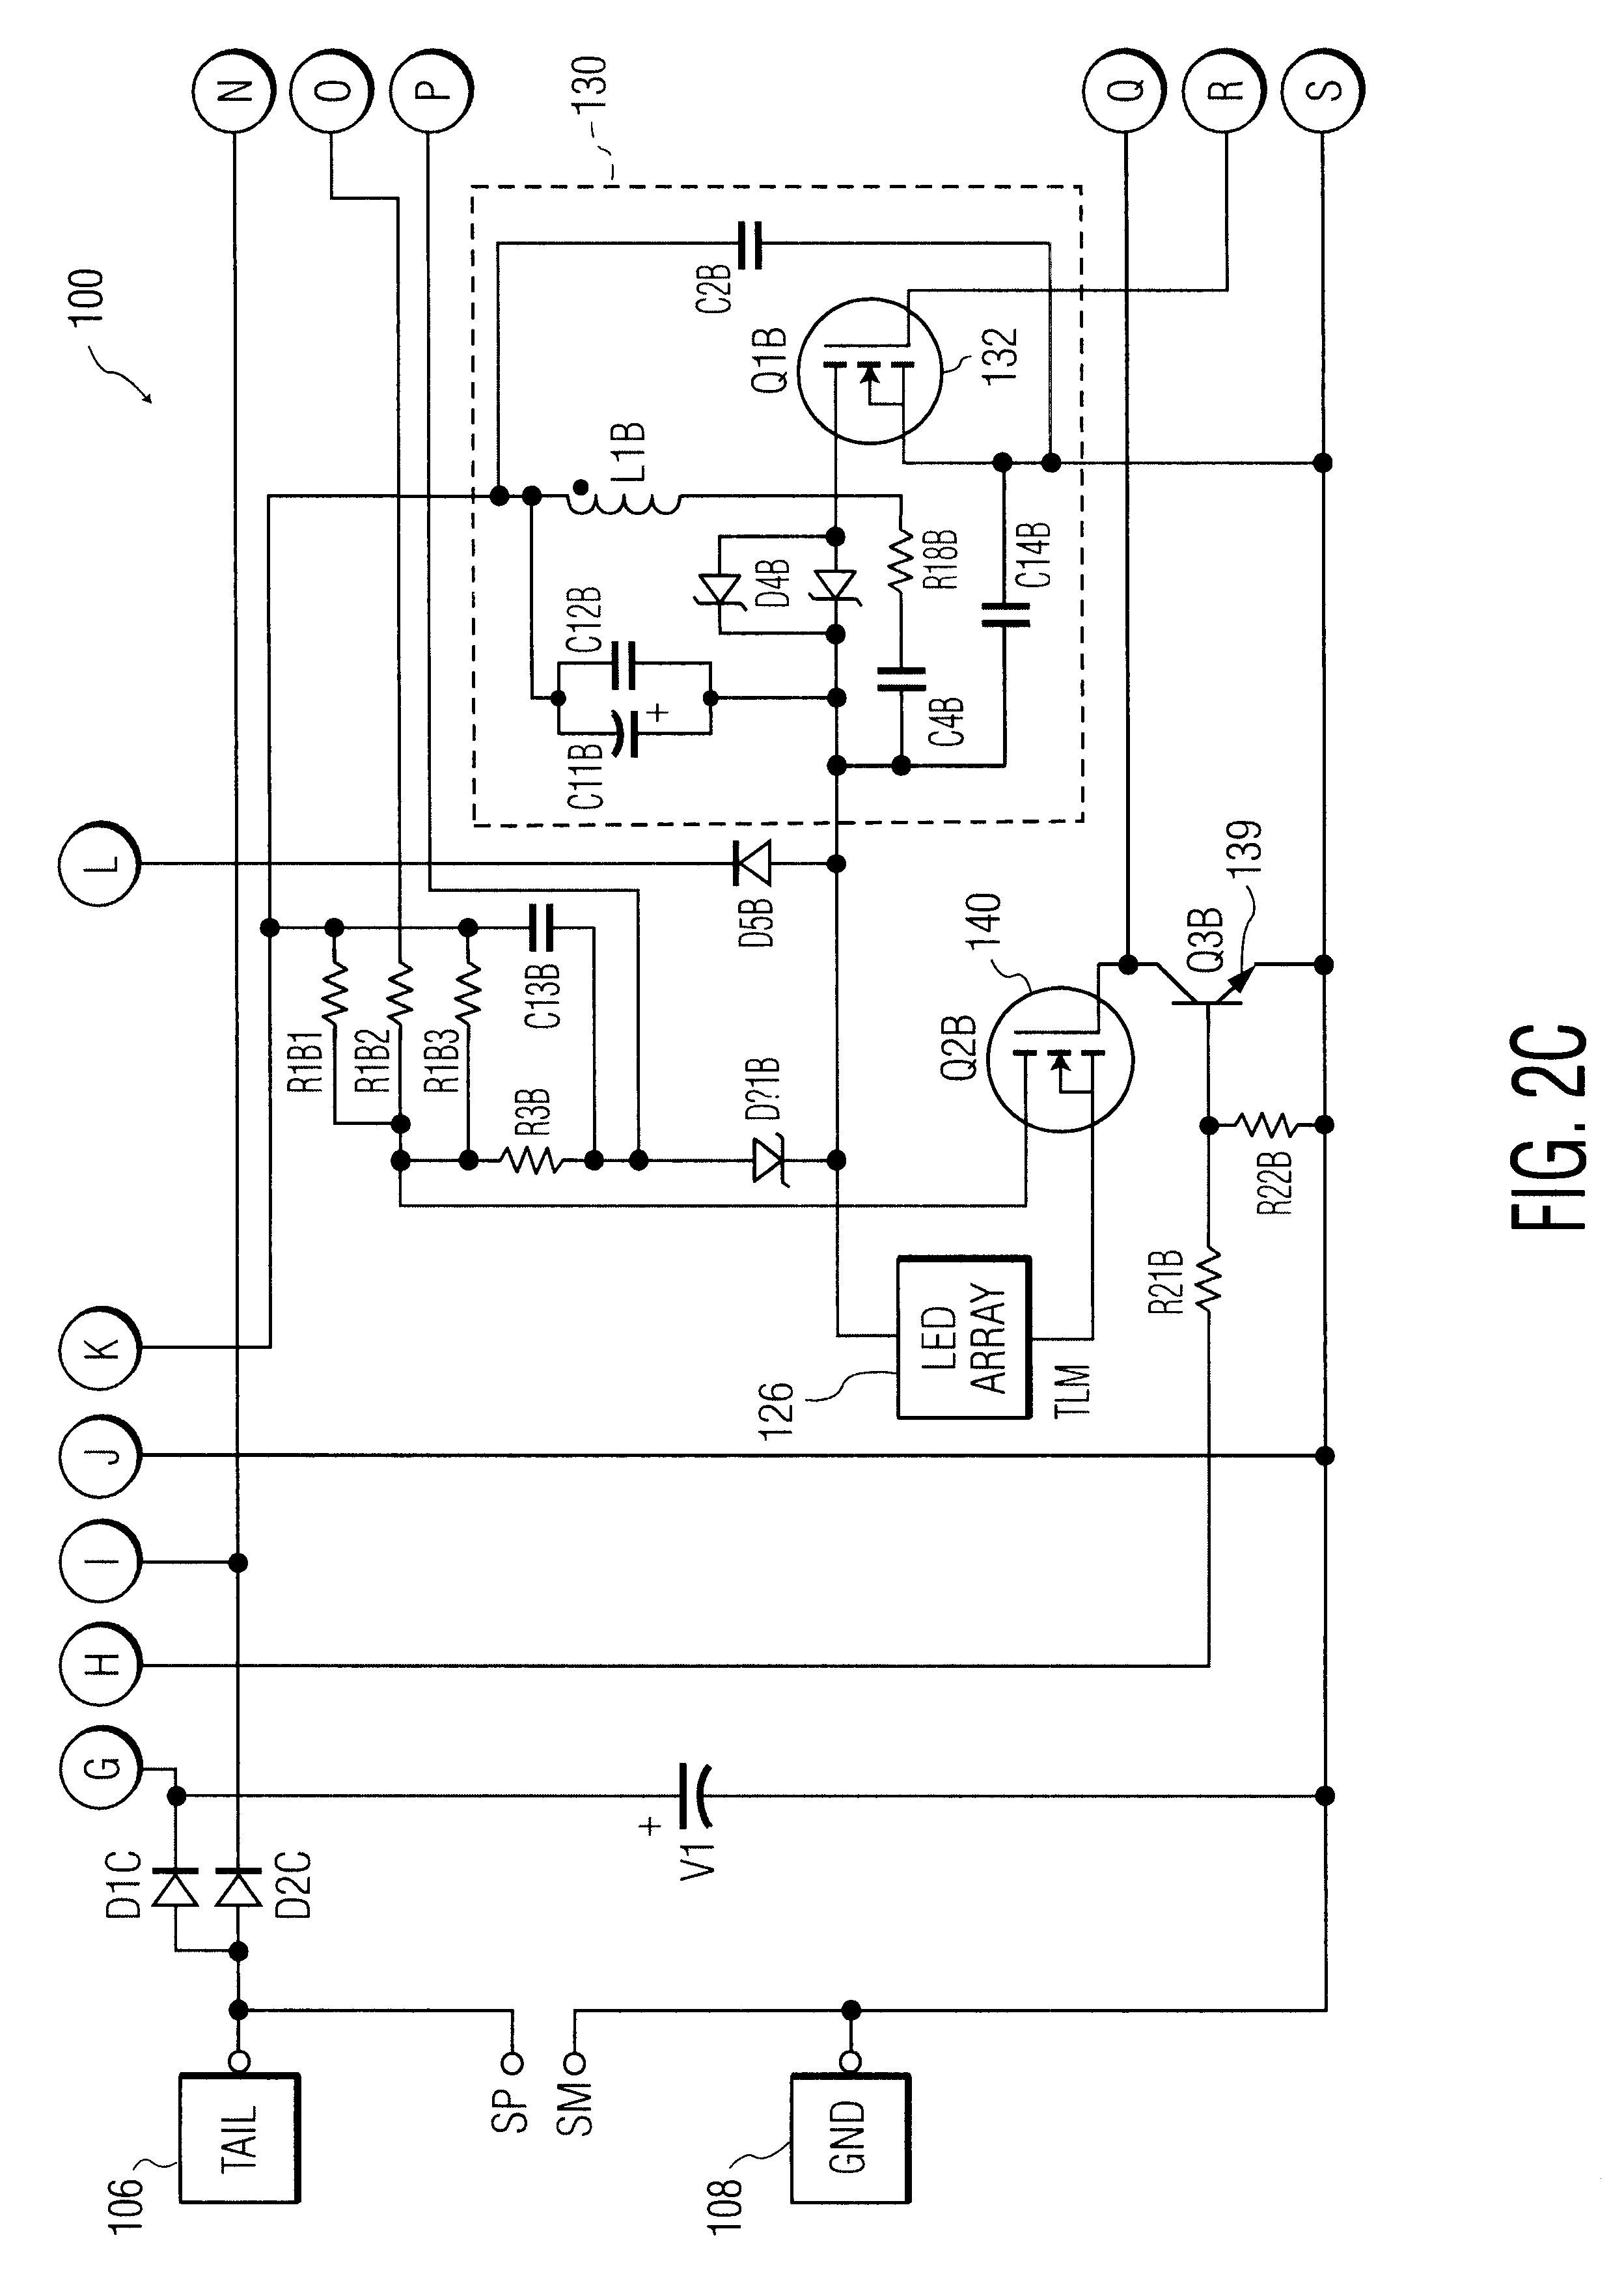 New Led Driver Circuit Diagram Diagram Installing A 2 Wire Led Dimmer Switch Beside A